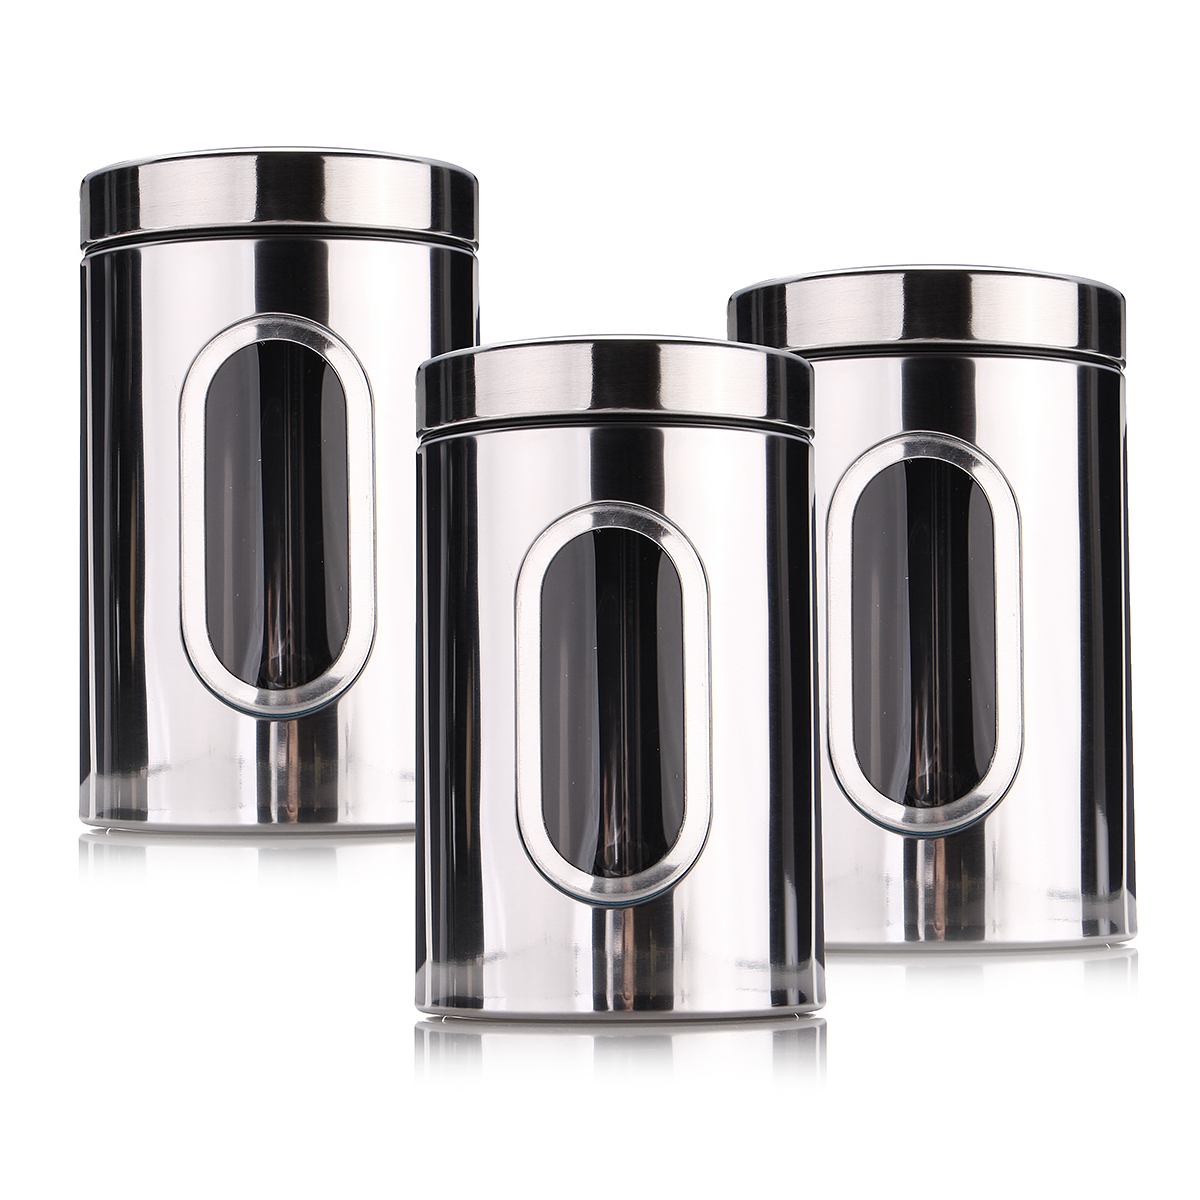 

3Pcs Stainless Steel Tea Coffee Sugar Canisters Kitchen Storage Container